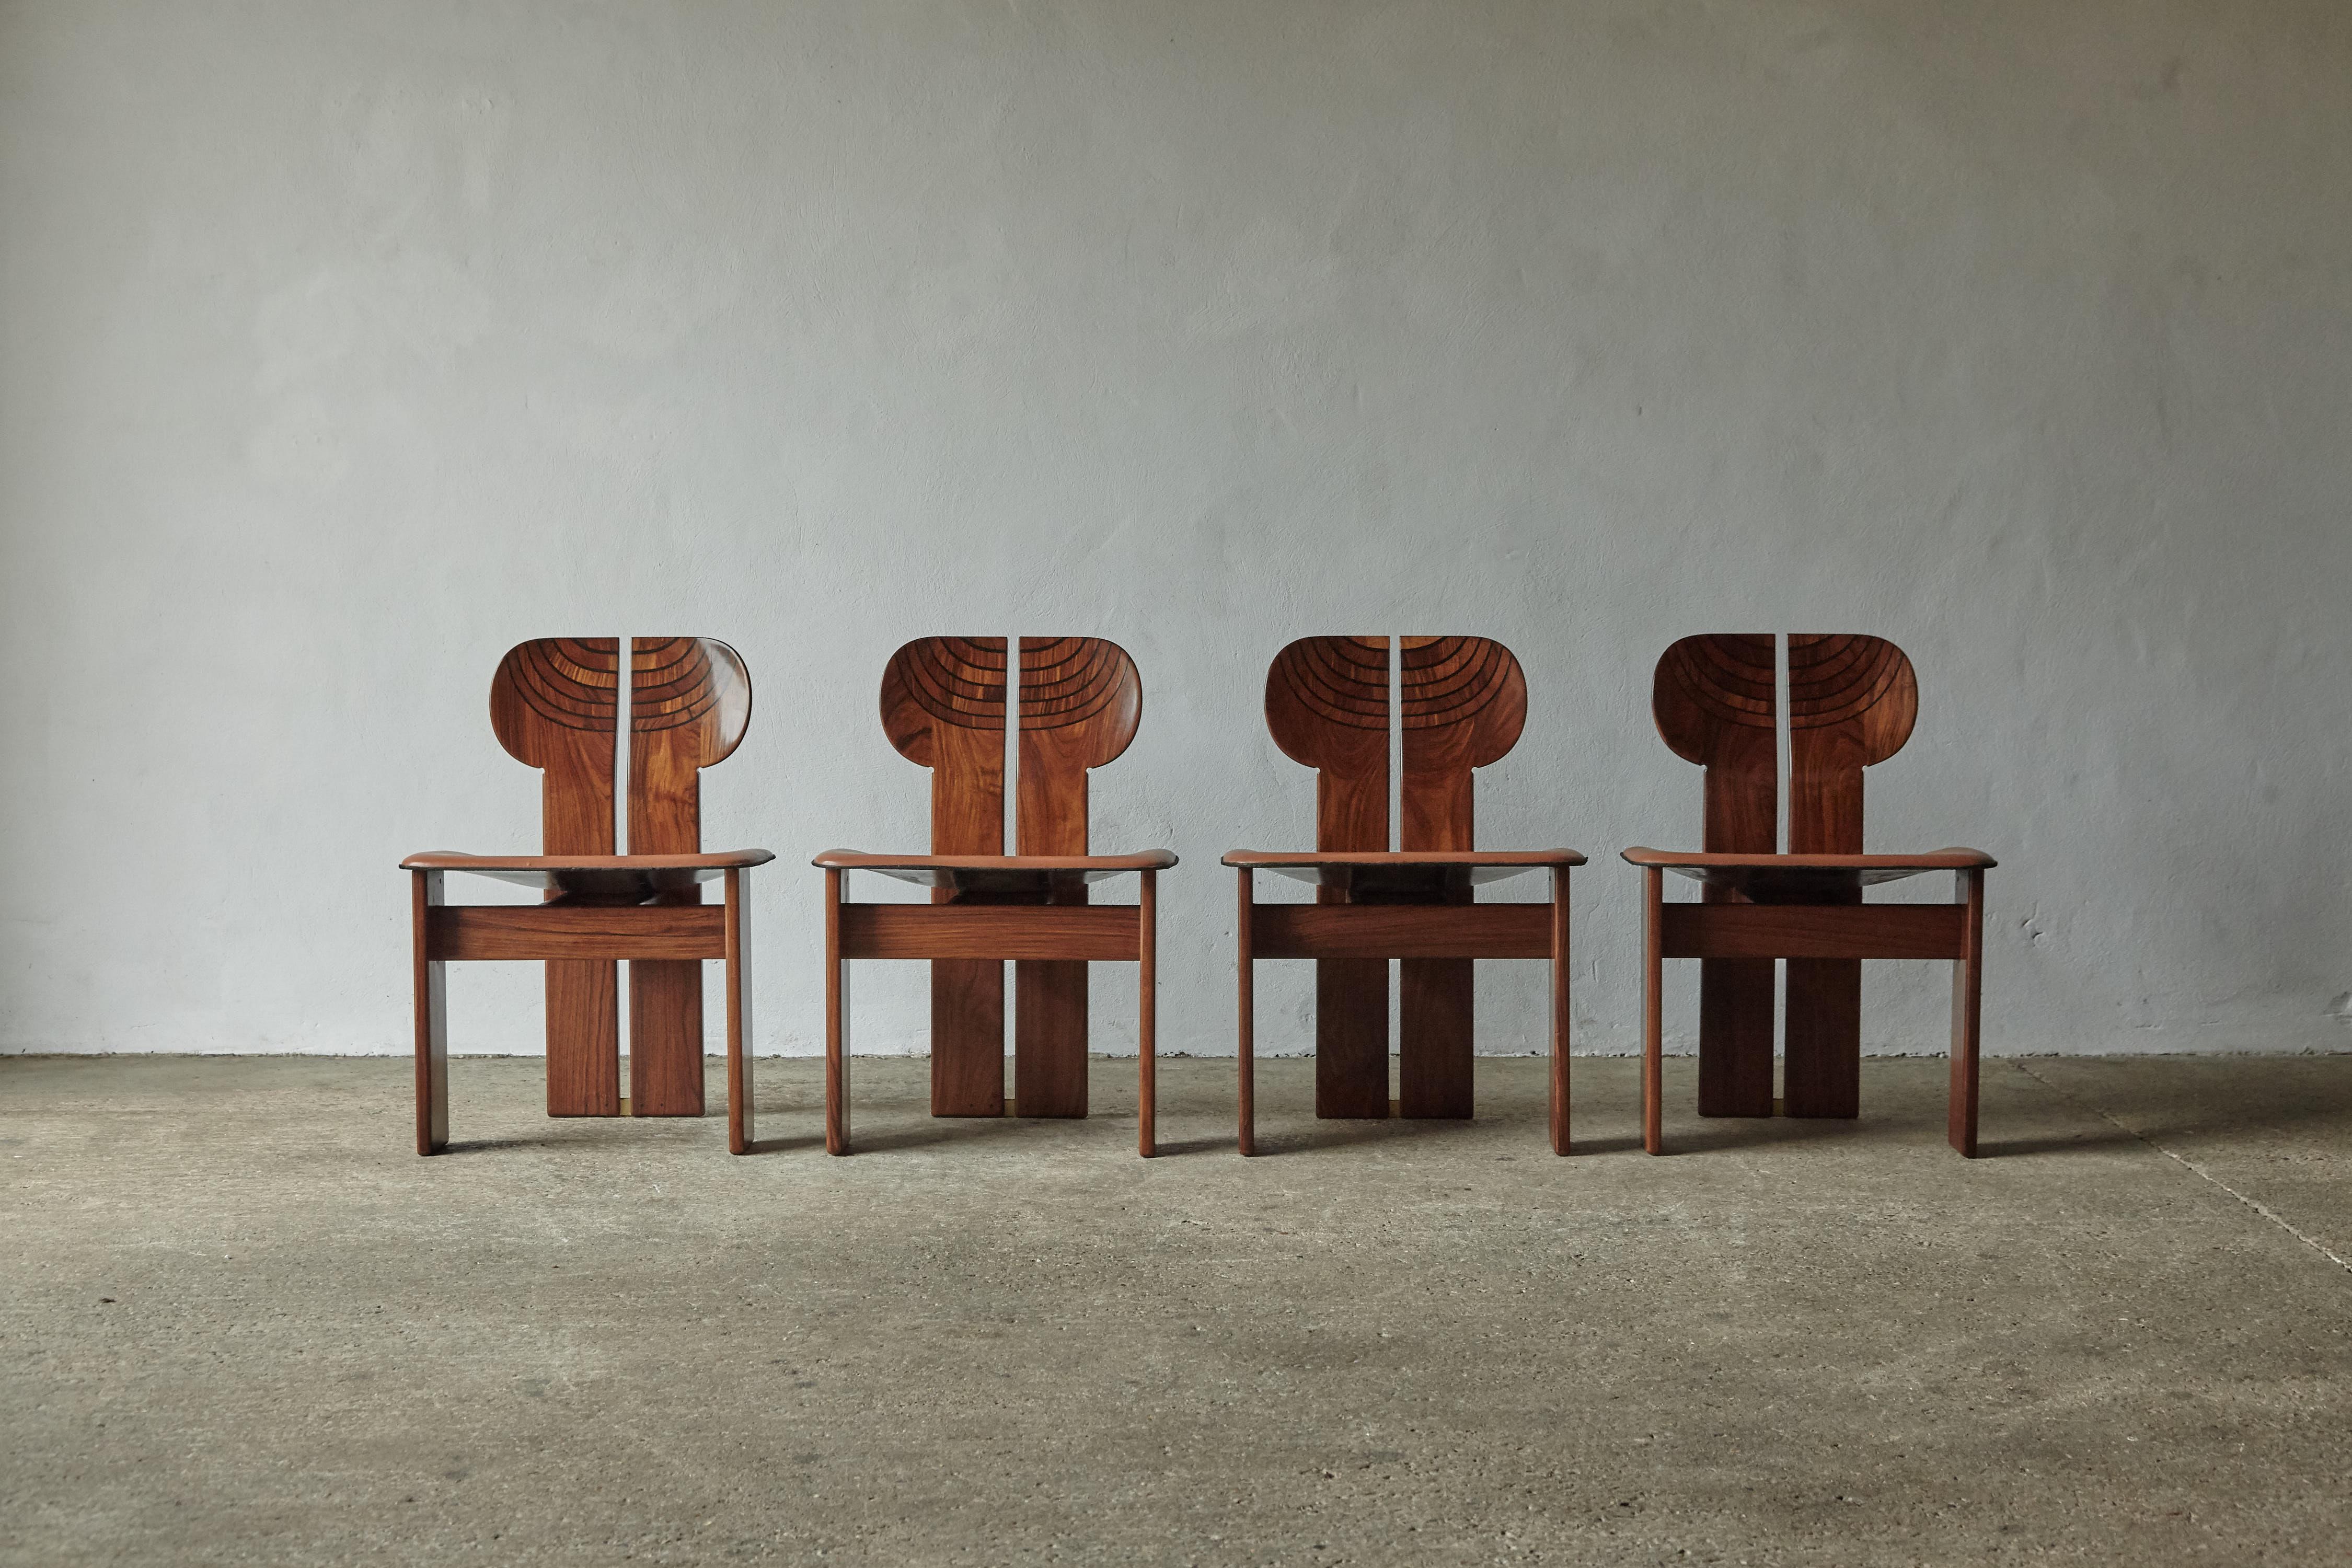 A rare set of four stunning Africa chairs designed by Afra & Tobia Scarpa in the 1970s, and produced by Maxalto, Italy. These are great examples in rare exotic hardwood, burl, black leather and brass. Good original condition with normal minor age